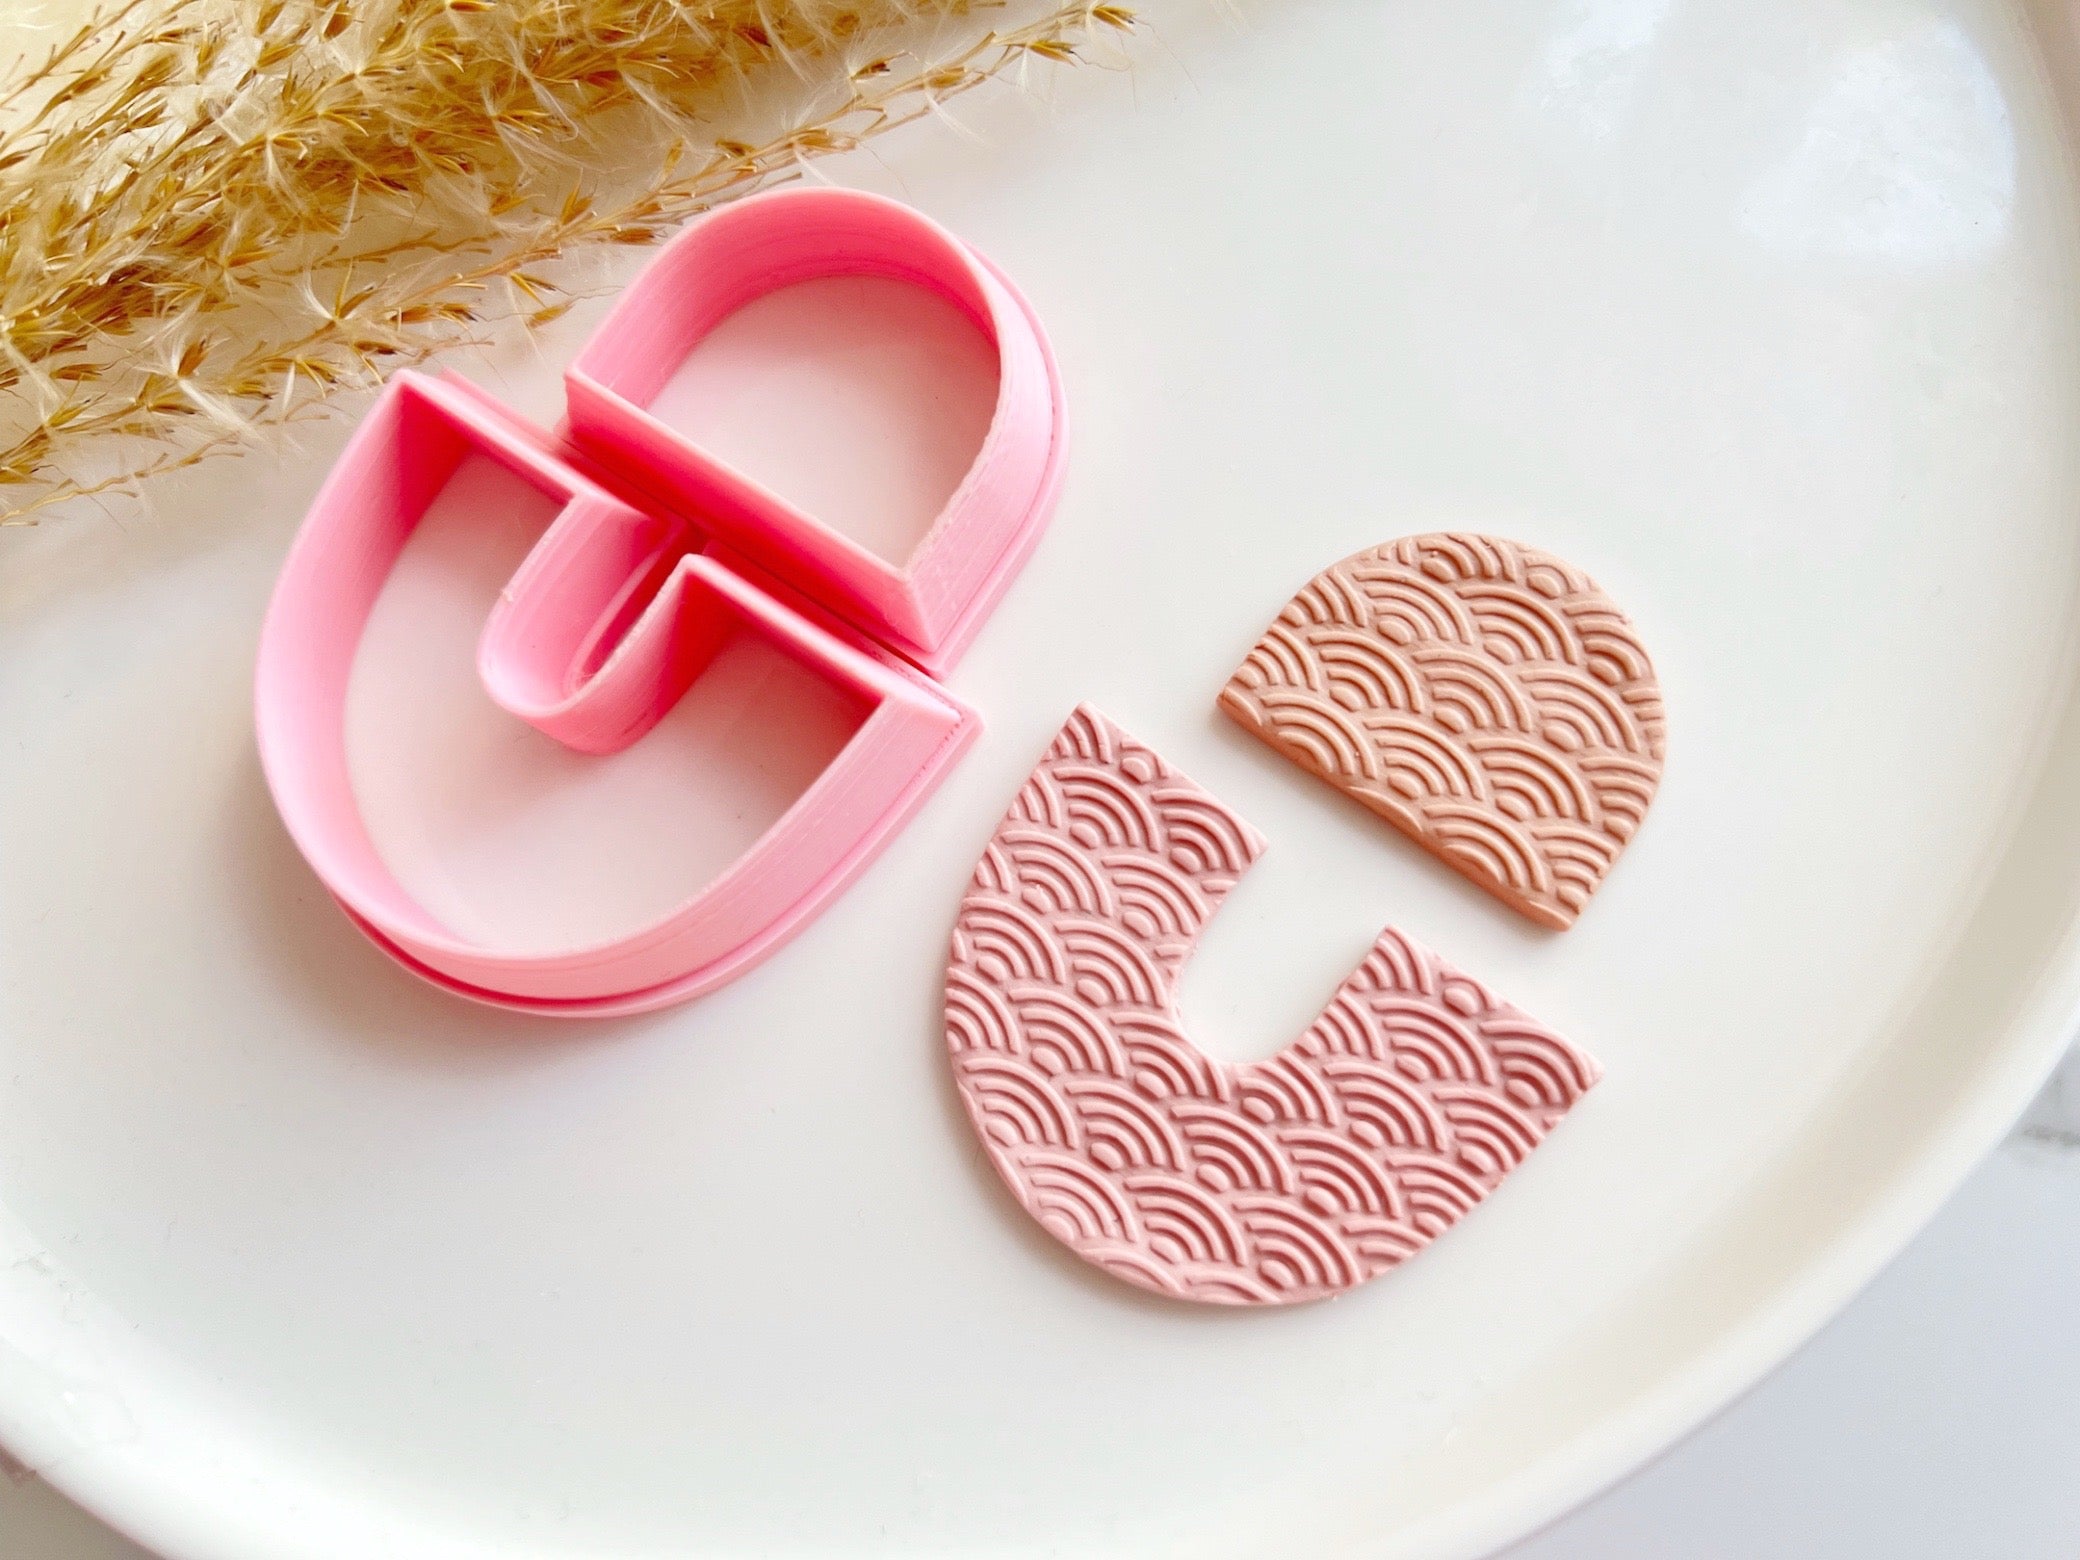 U Dome Set Shape with Heart Donut Shaped Polymer Clay  Cutter • Fondant Cutter • Cookie Cutter